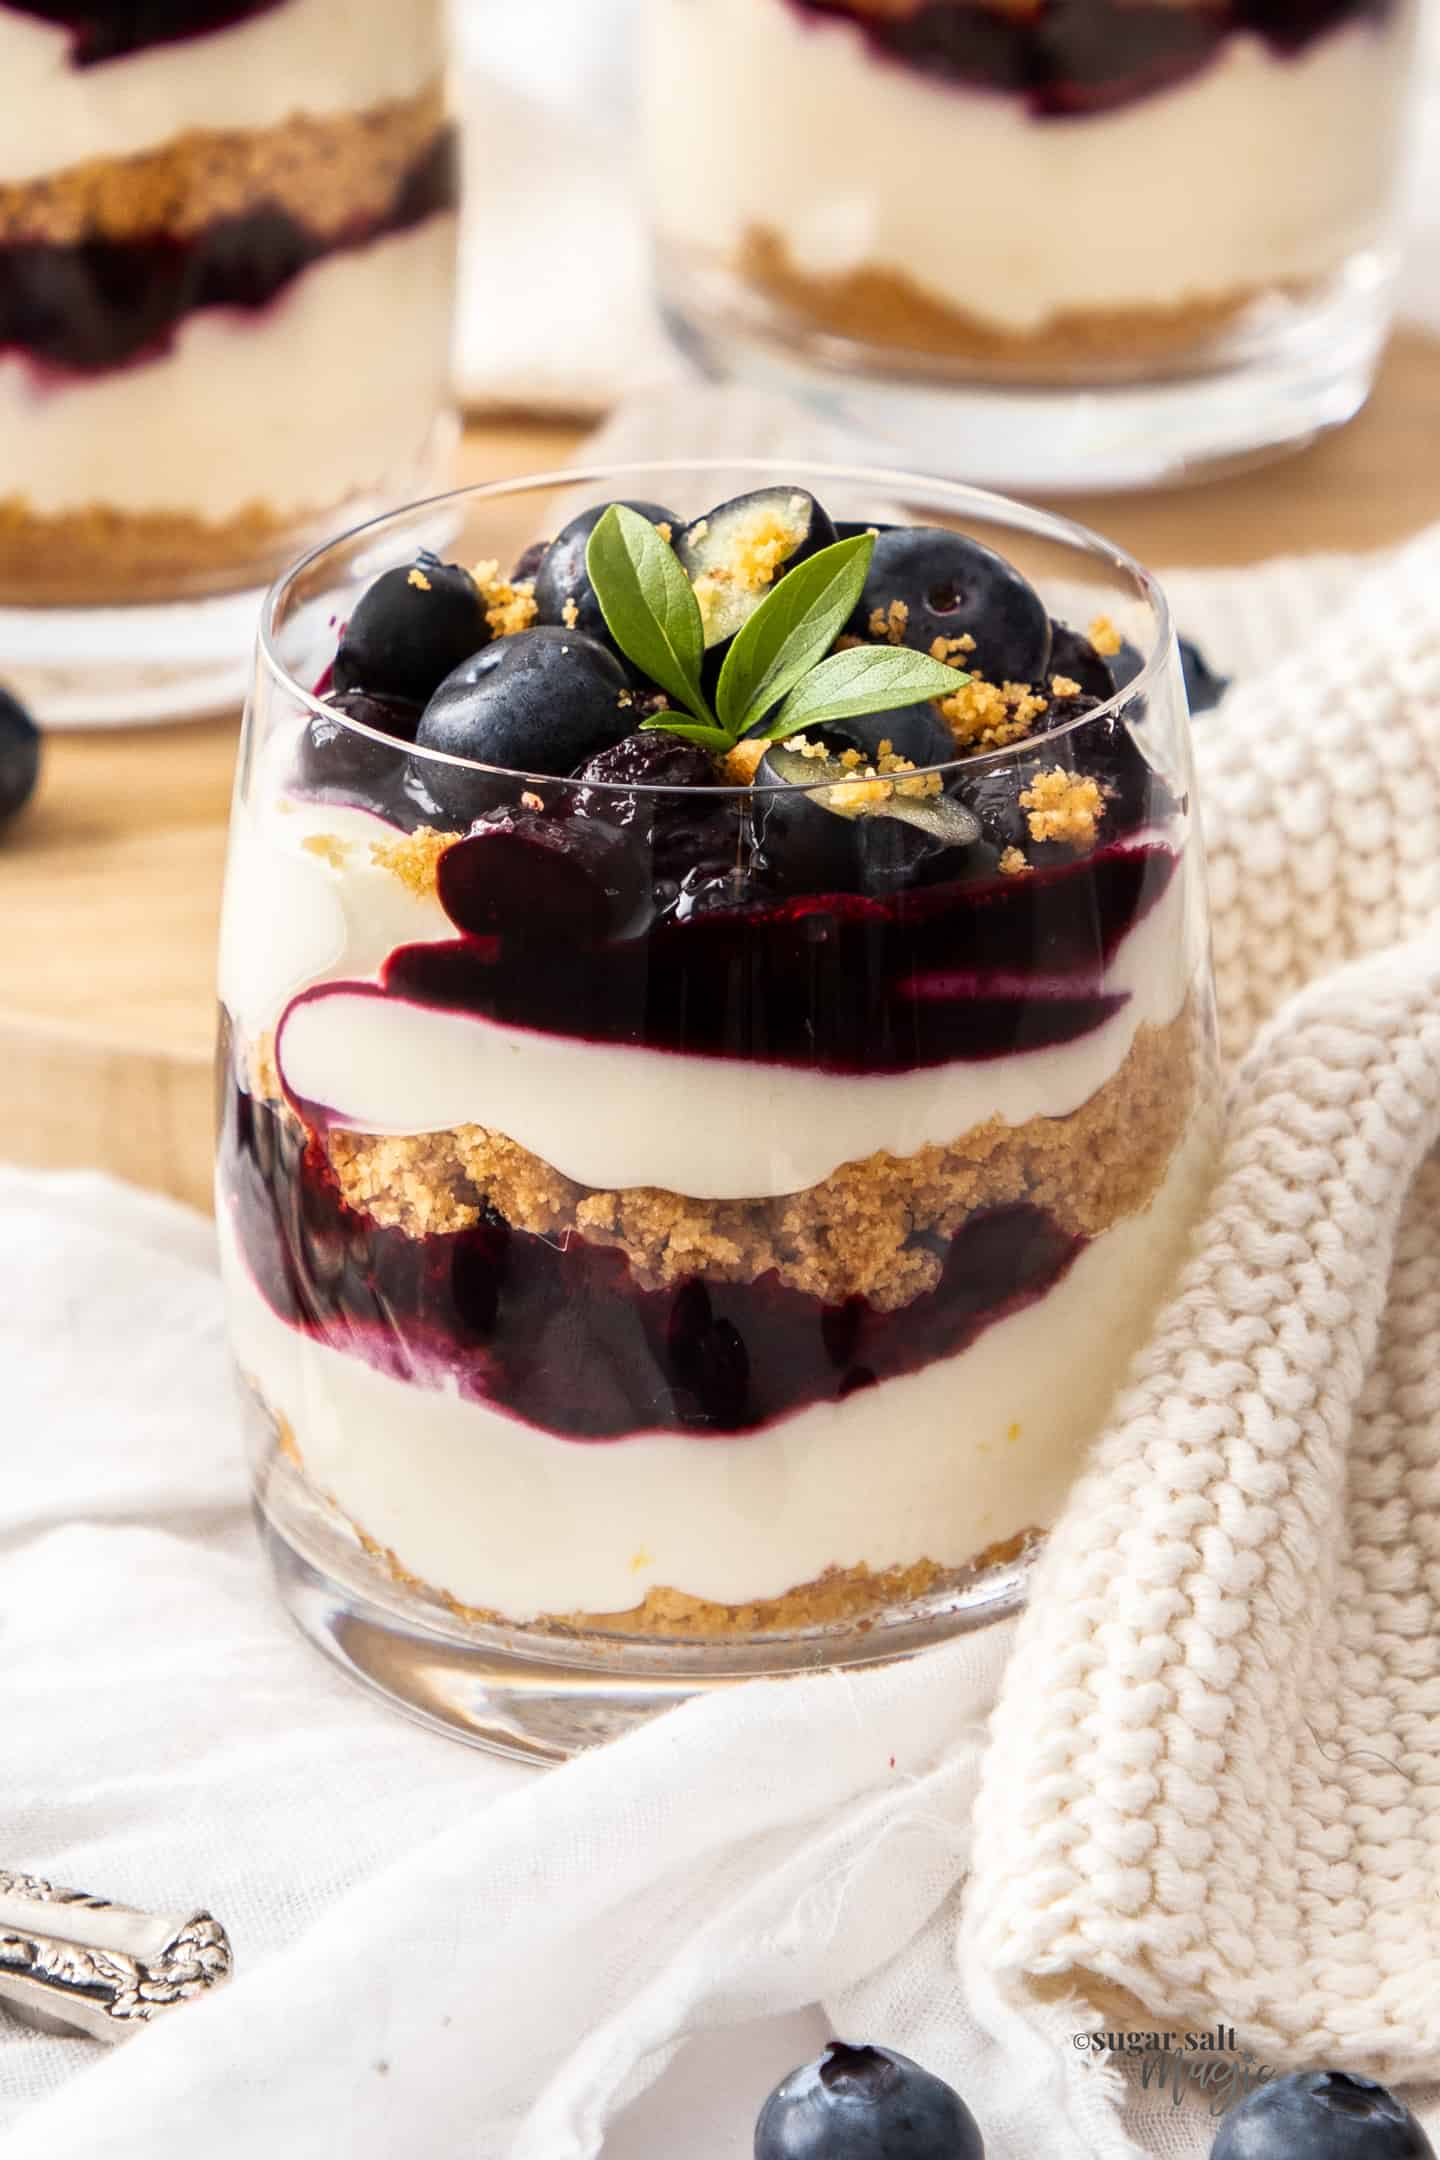 Apples and cream Parfait Brownie Delight Blueberry Cheesecake.